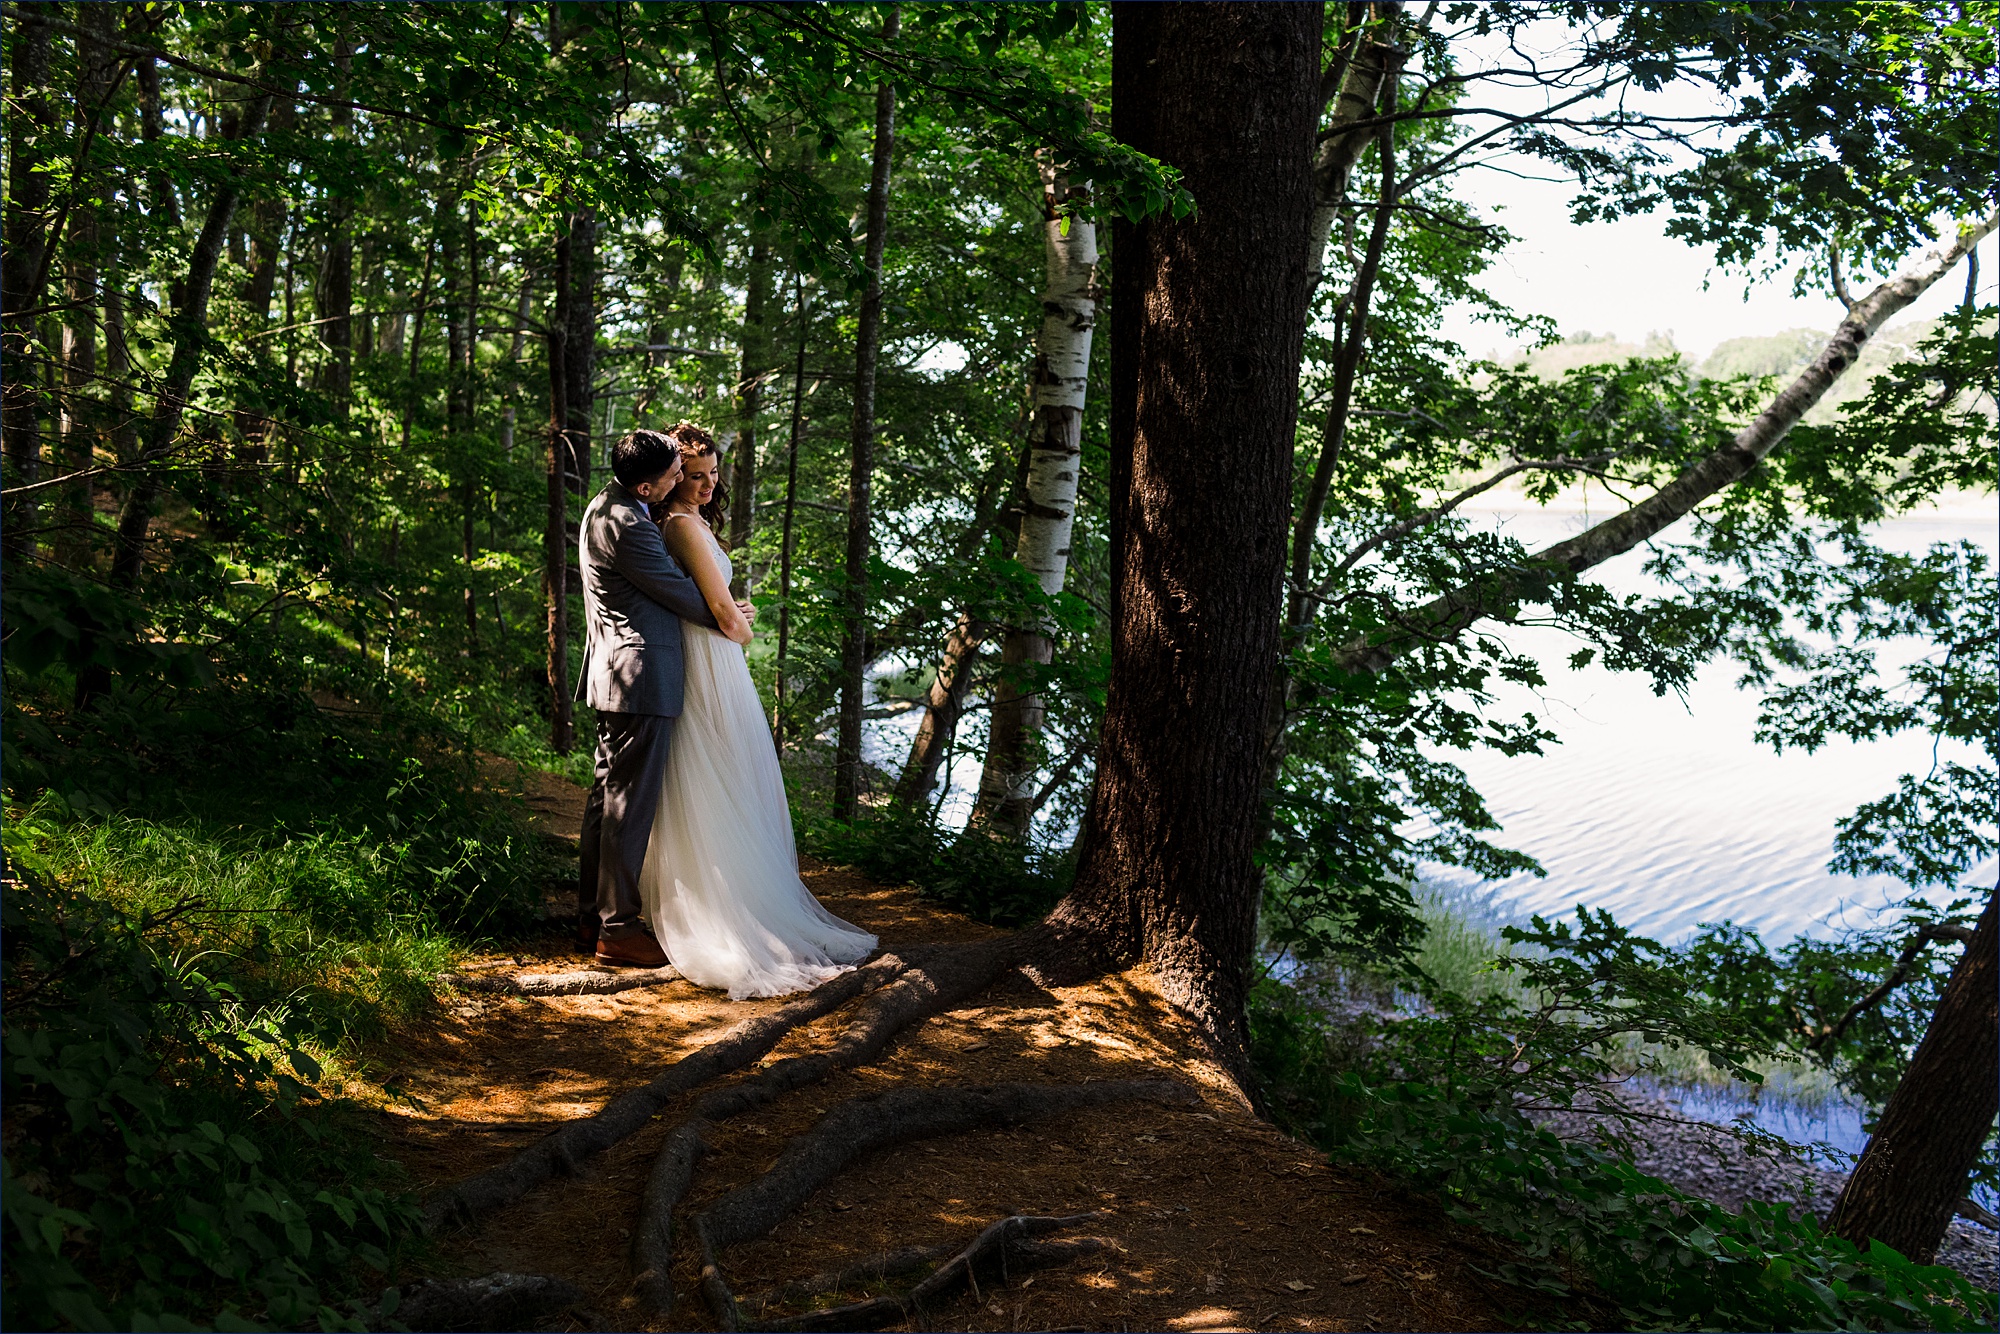 The bride and groom share a kiss while he holds her in the cool woods on their York Maine Wedding day